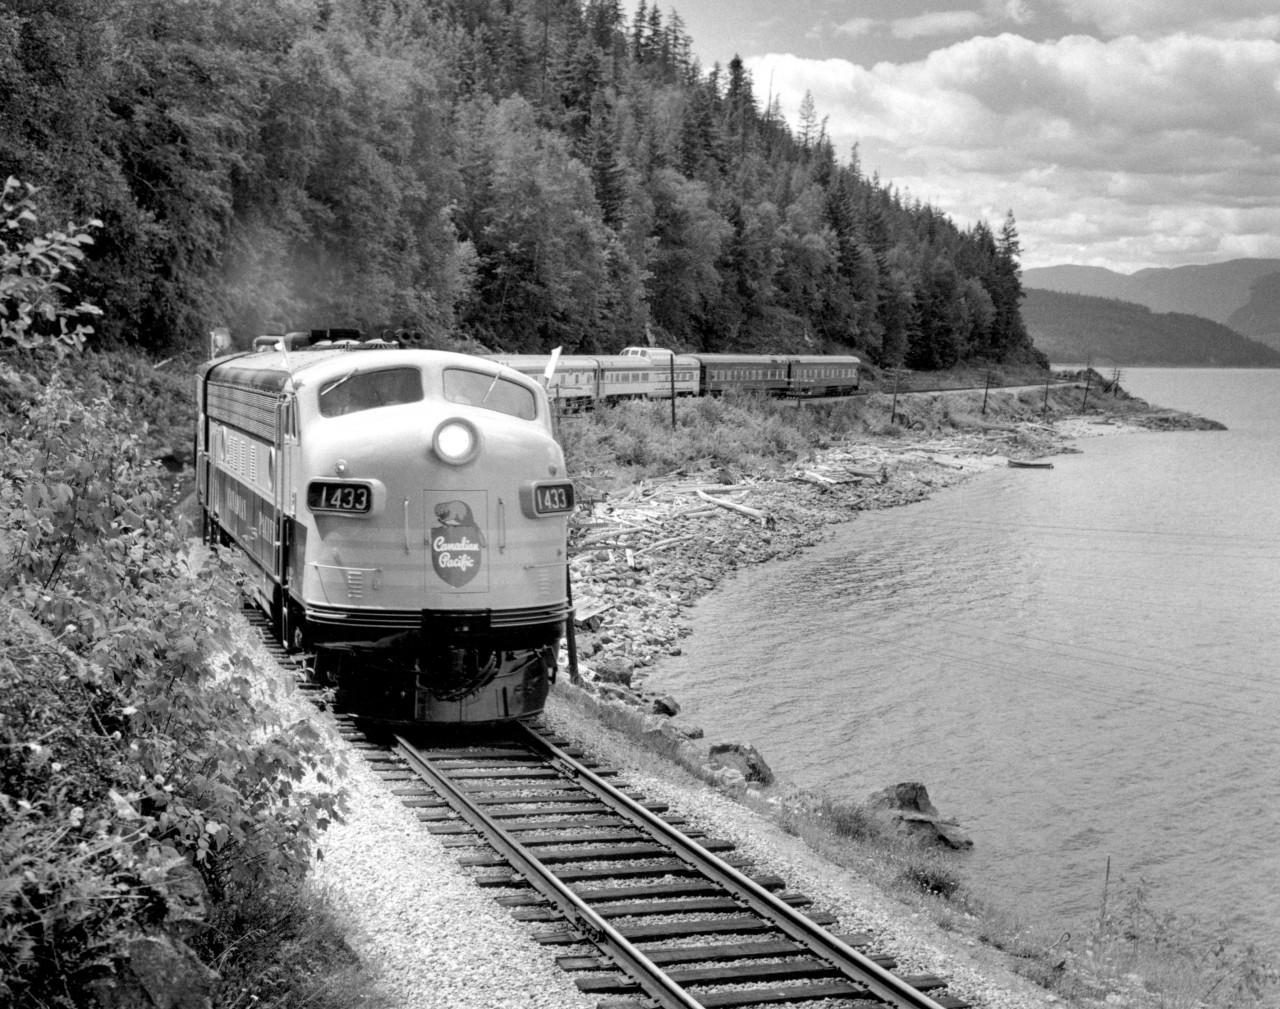 The centennial celebrations of the Province of B.C.'s becoming a Crown Colony in 1858 were marked by a visit of Princess Margaret to the Province.  Upon leaving Vancouver for Banff, the CPR provided the Princess with a 9 car special, including one dome & two business cars, which special train is seen here, July 29, 1958, on the shores of Shuswap Lake, 72 miles east of Kamloops.  Waiting behind spiked switches, all opposing passenger trains cleared X E 1433 by one hour, freight trains by 5 hours.